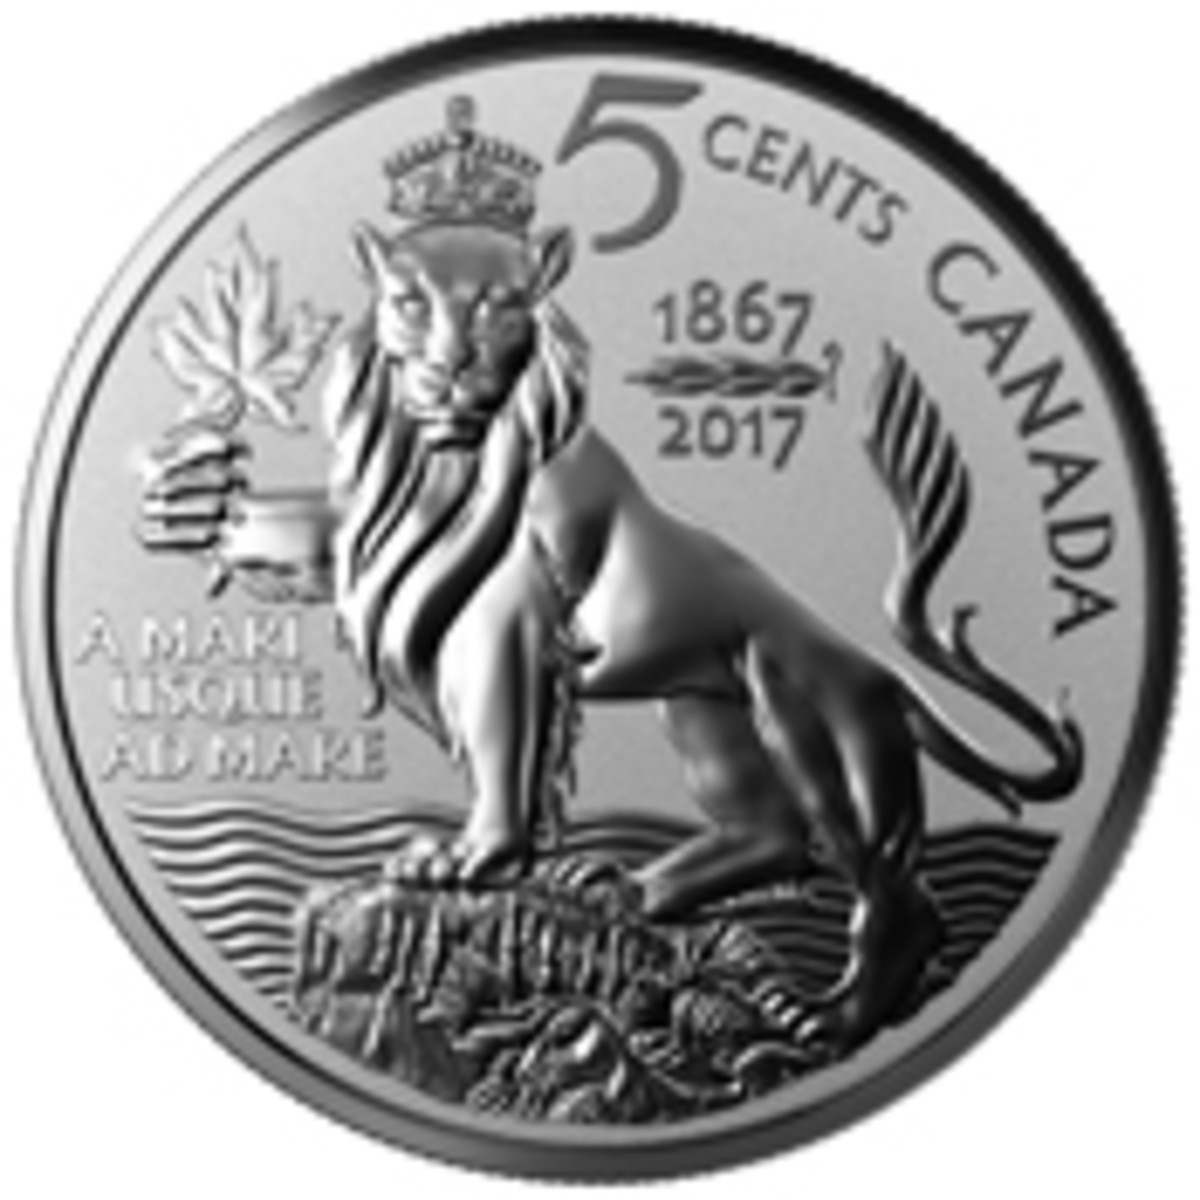  Unused design from 1927 Diamond Jubilee 5 cents: the crowned British lion stands proud while firmly clutching a maple leaf.